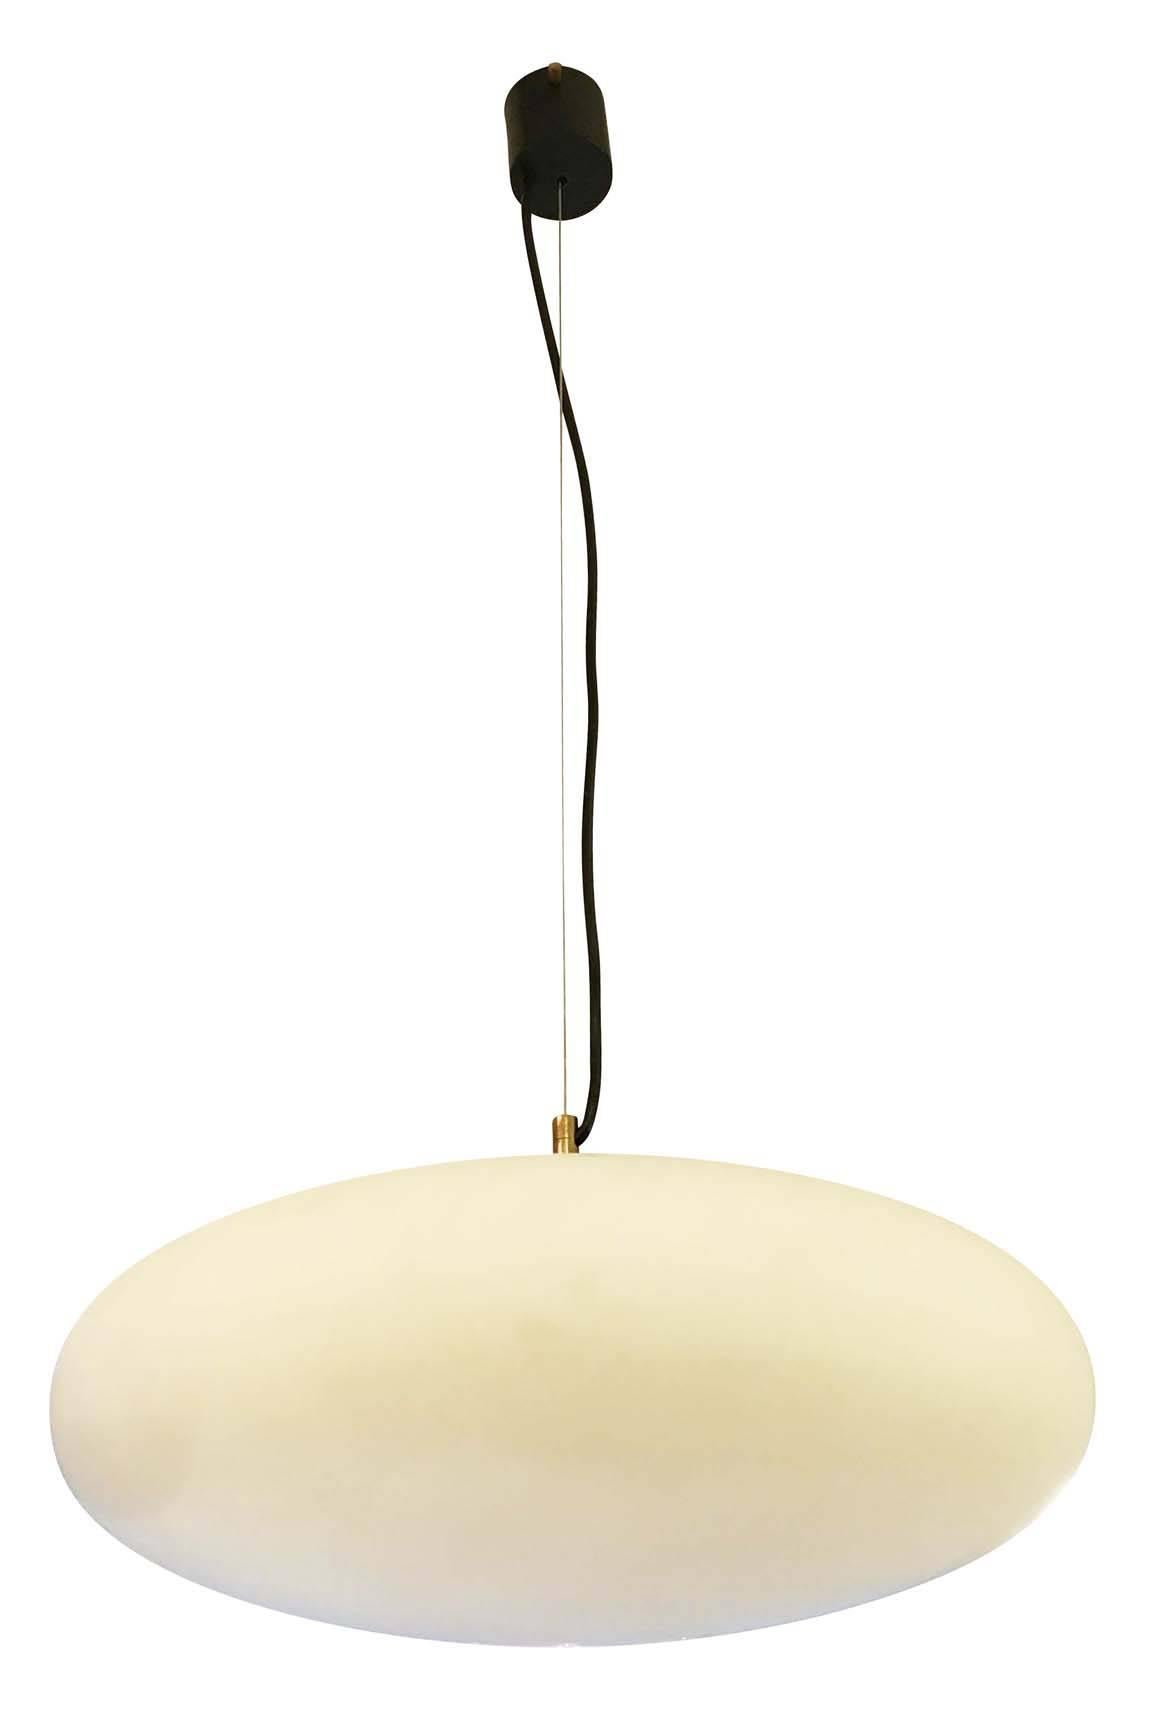 Stilnovo attributed frosted glass pendants with brass and black lacquered hardware. Each holds one regular socket and can be hung on a wire of any length. Three are available which can be sold individually or together to create a breathtaking